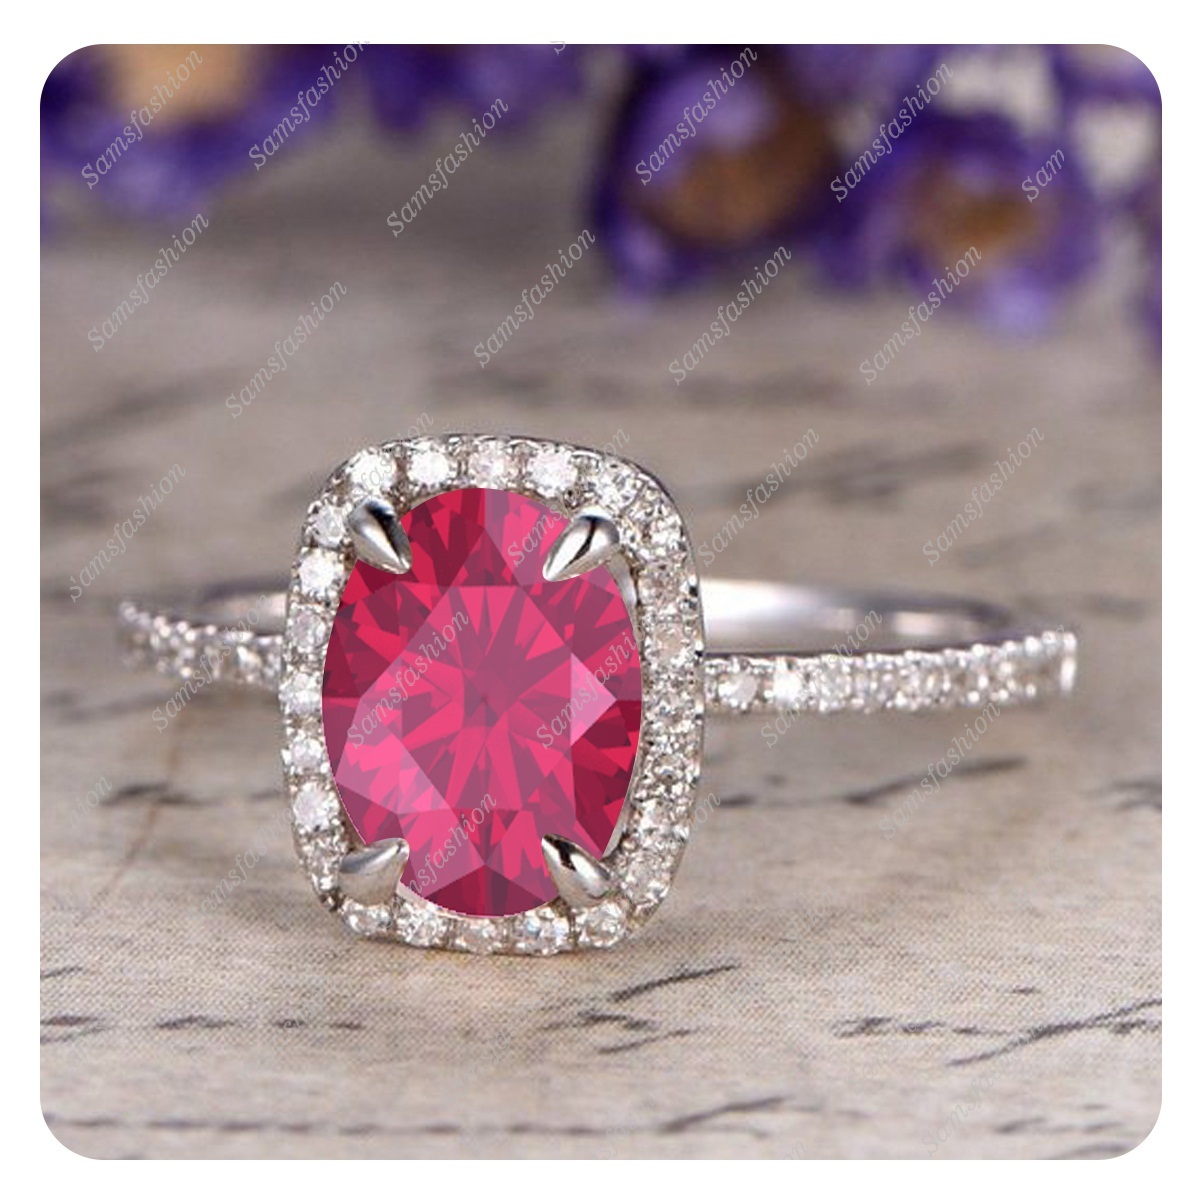 6x8mm Oval Cut Ruby & Diamond 14k White Gold Over .925 Silver Engagement Ring